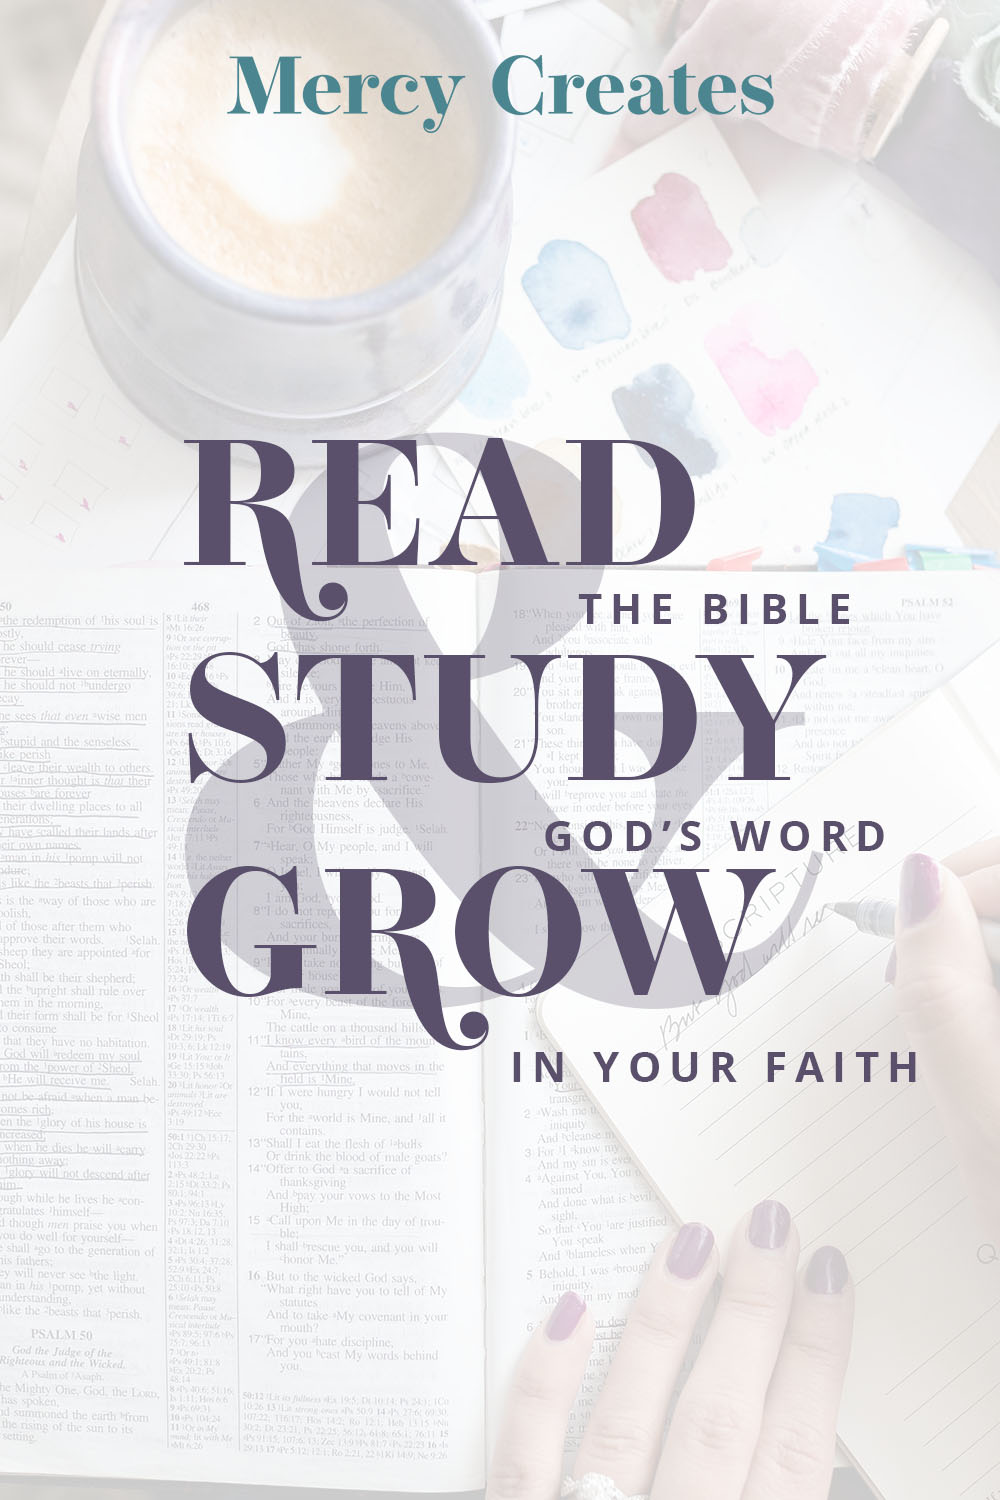 Read the Bible, study God's Word, grow in your Faith with Mercy Create's free Bible study resource!